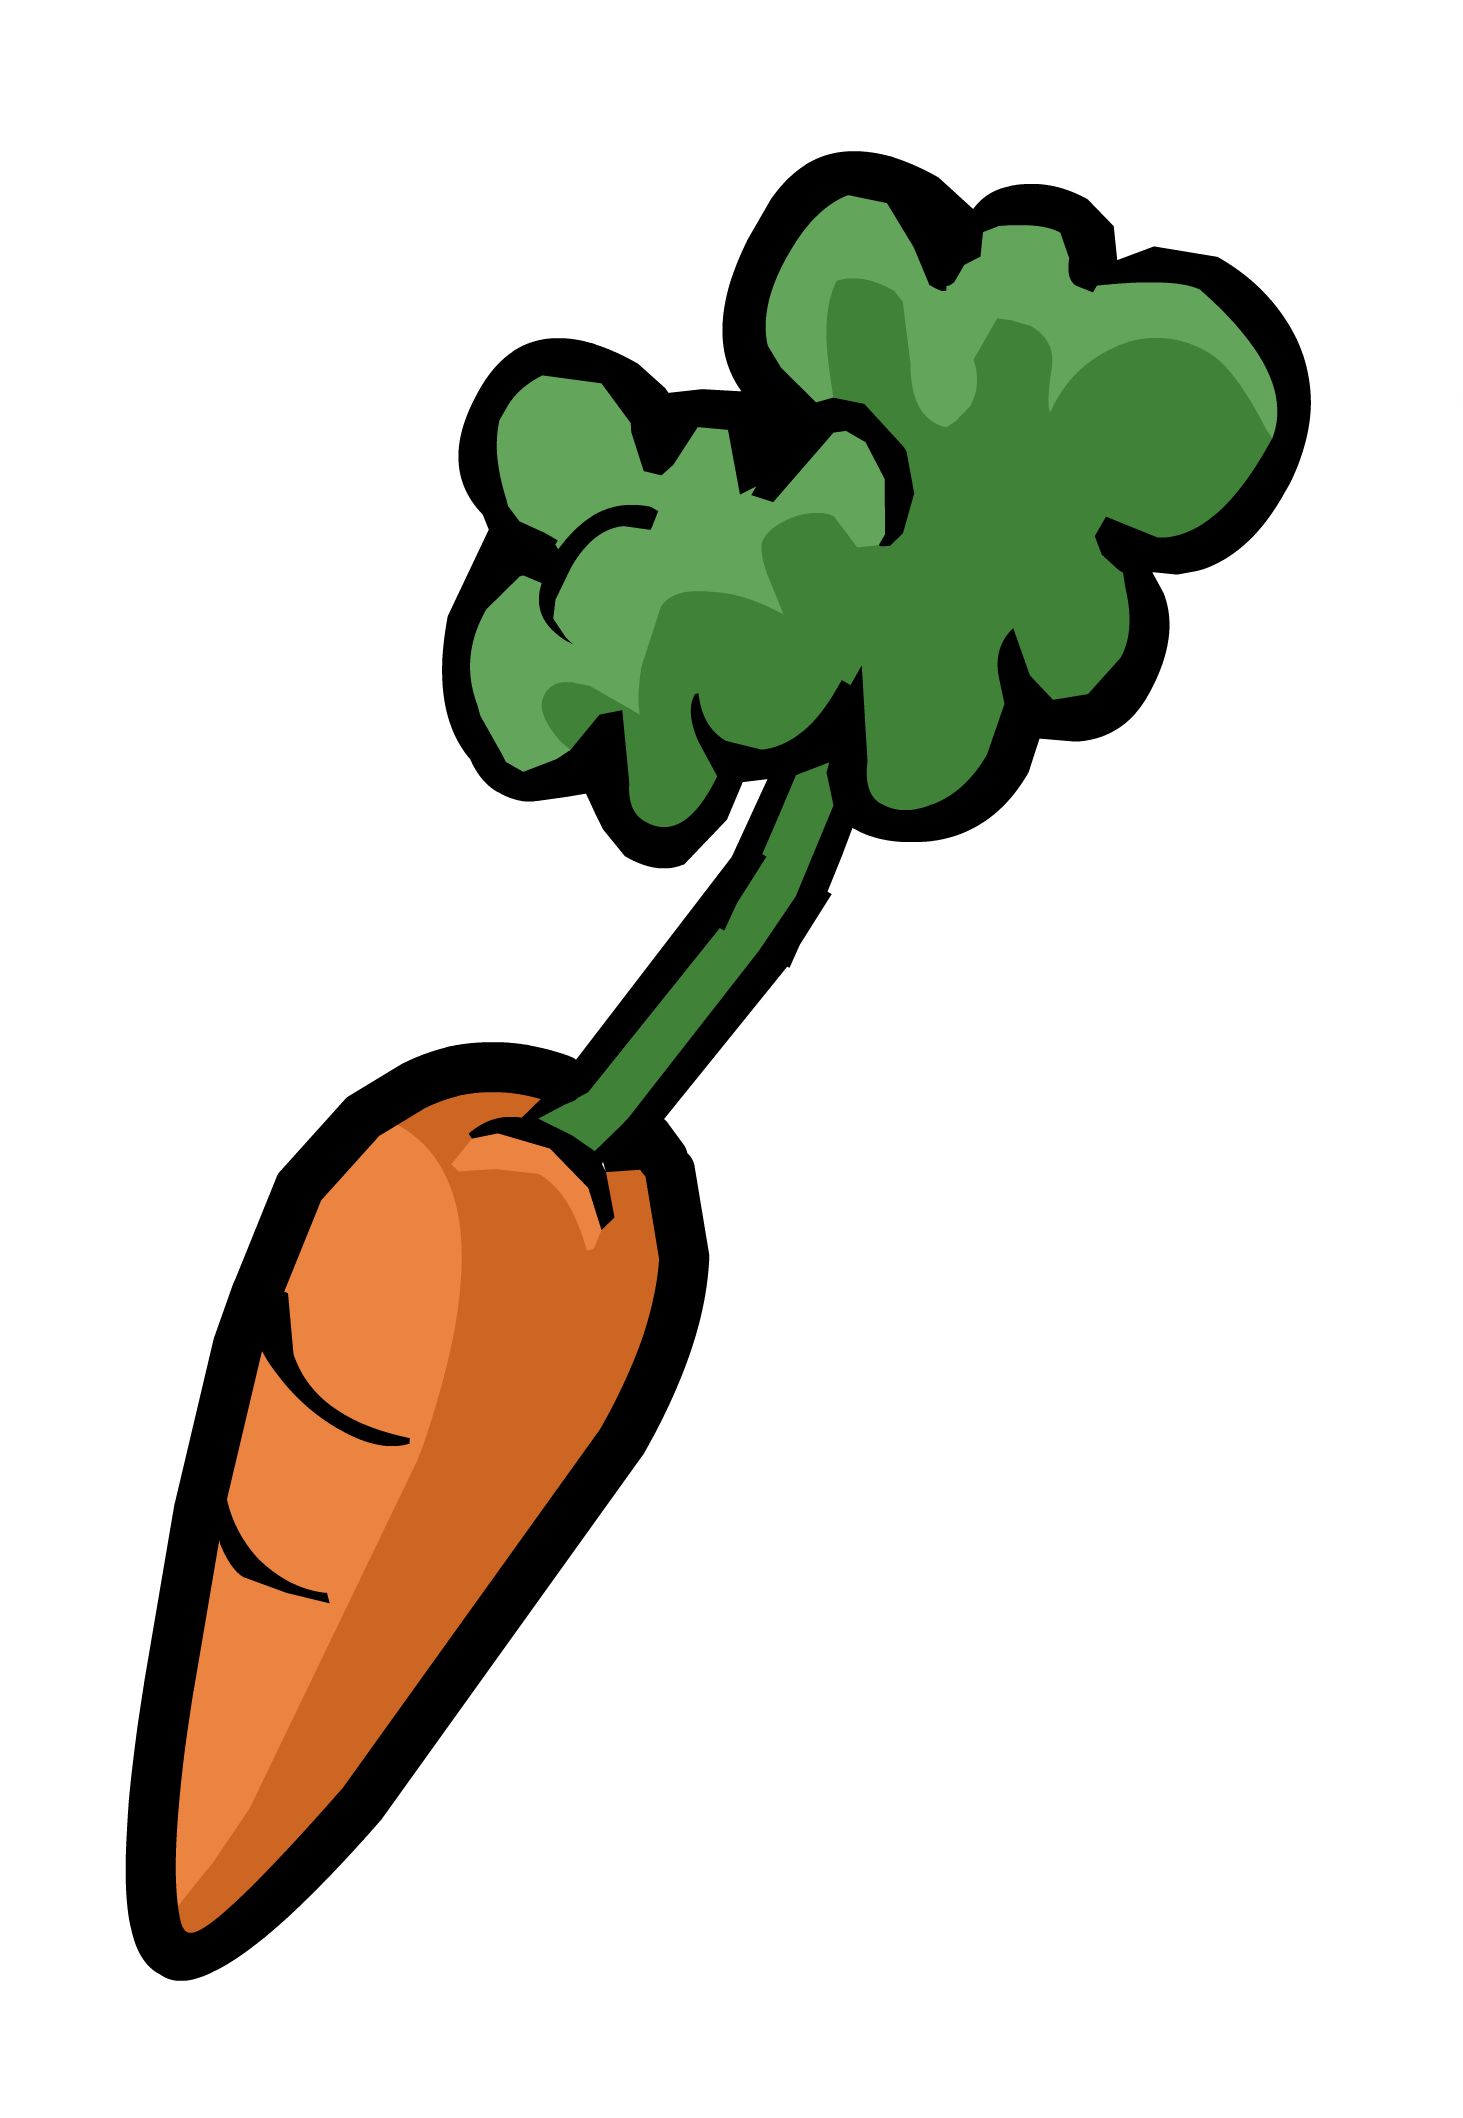 Carrot Picture - Club Penguin (1463x2118)